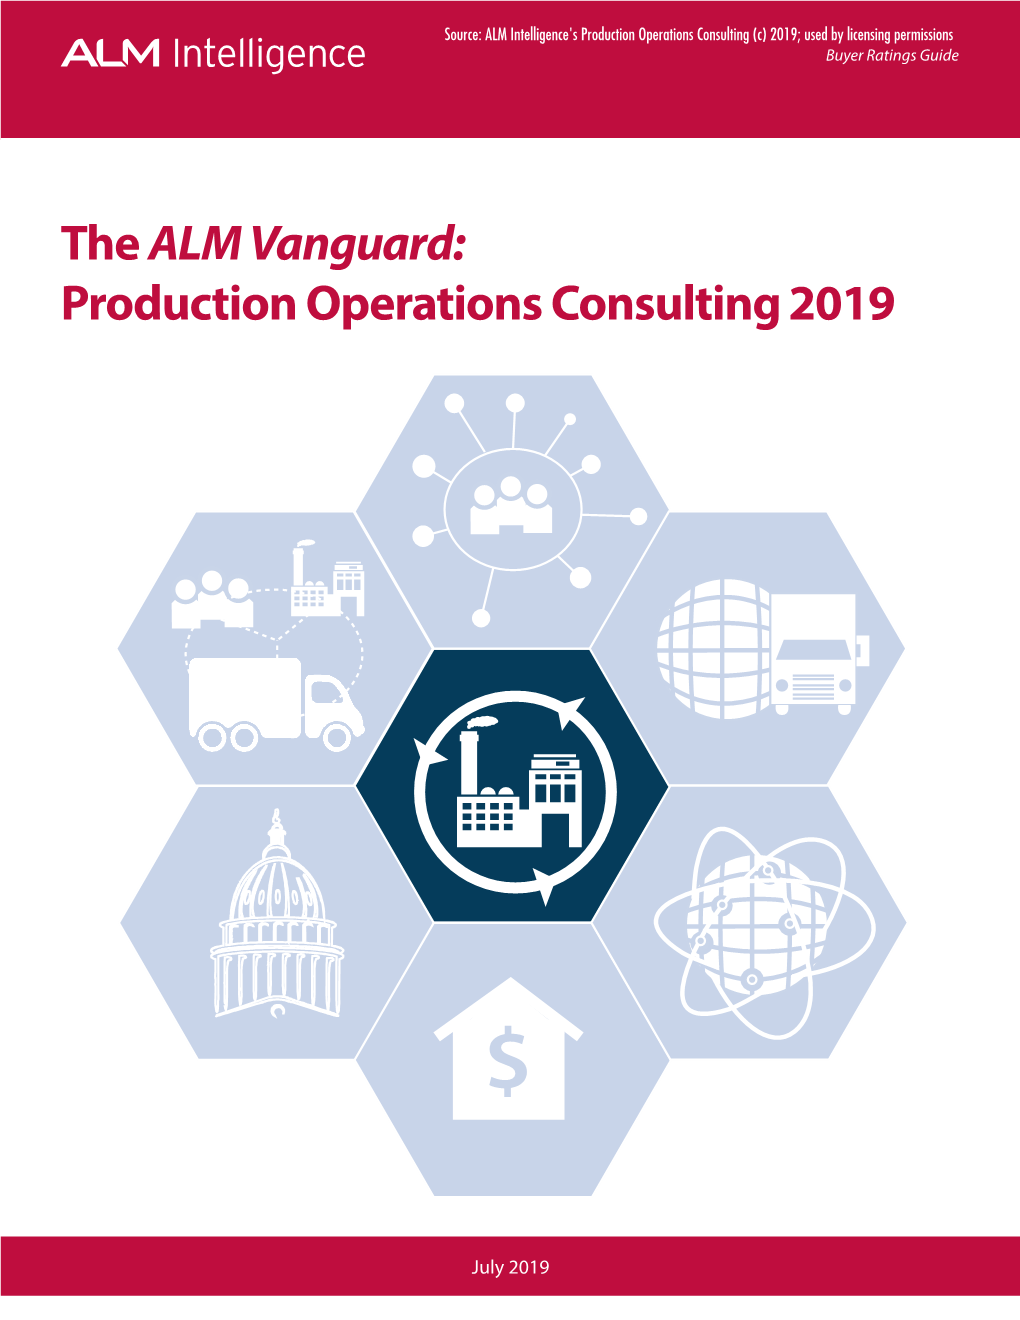 The ALM Vanguard: Production Operations Consulting2019